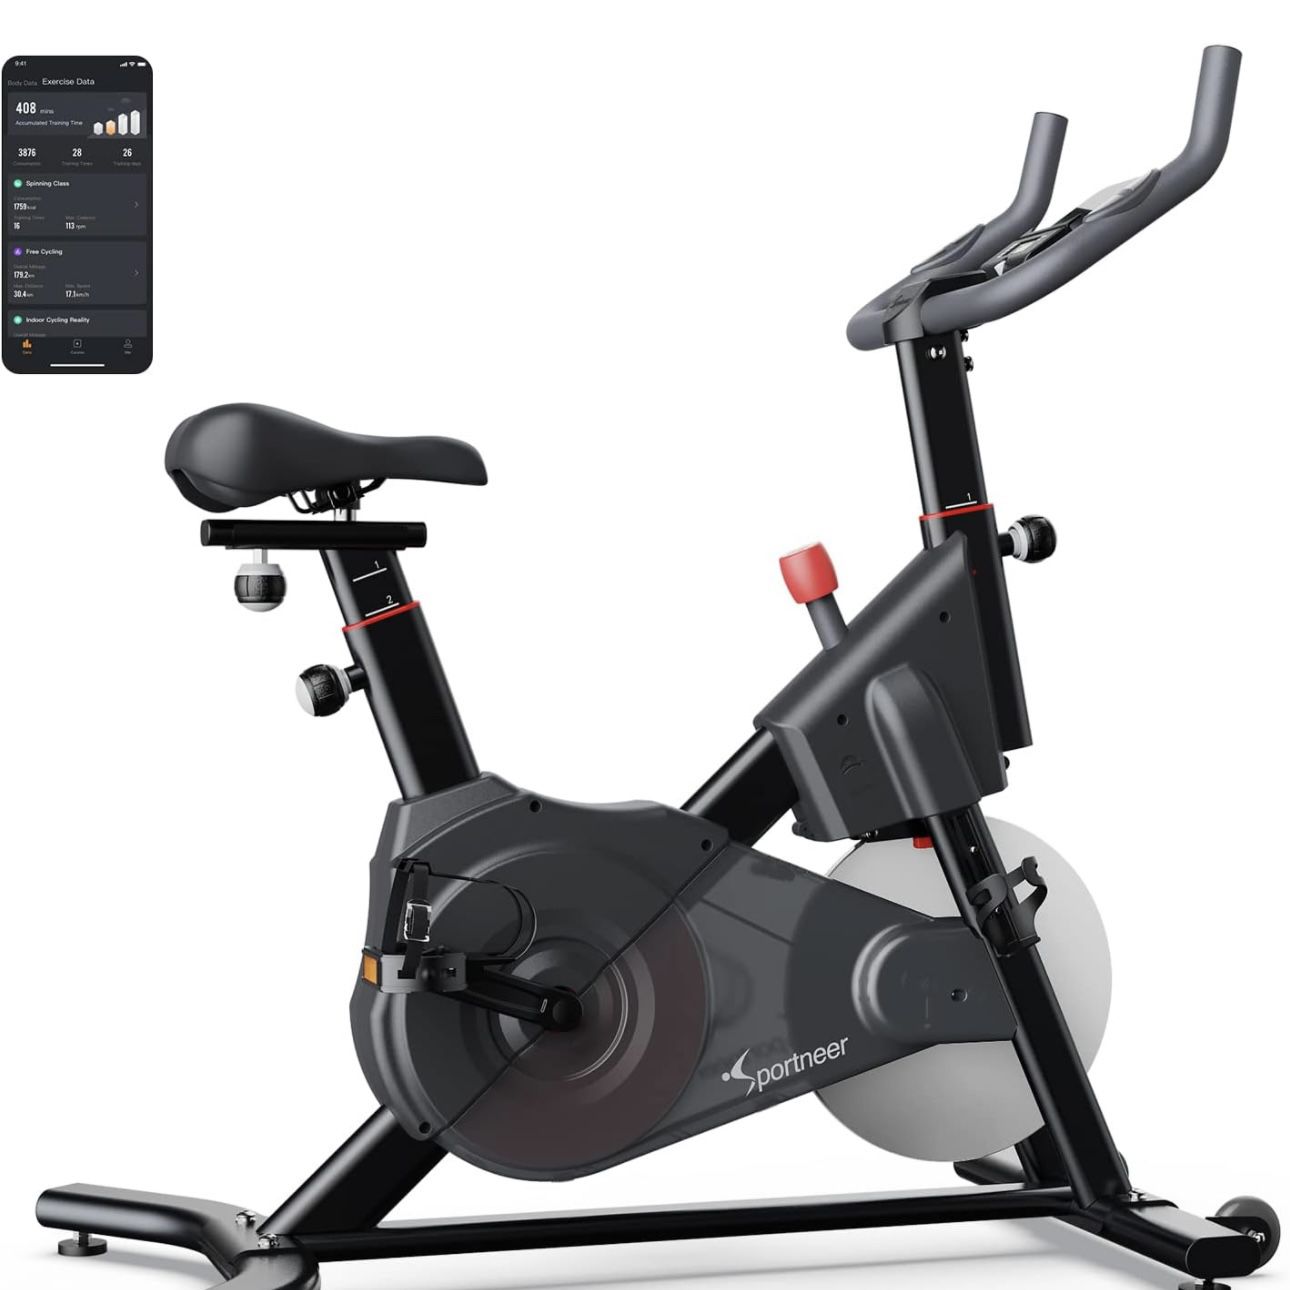 Sportneer Flywheel S1 Exercise Bike (Quiet), Indoor Cycling Bike Stationary Magnetic Resistance Spin Bike Cycle Workout Bikes for Home Gym, Bluetooth